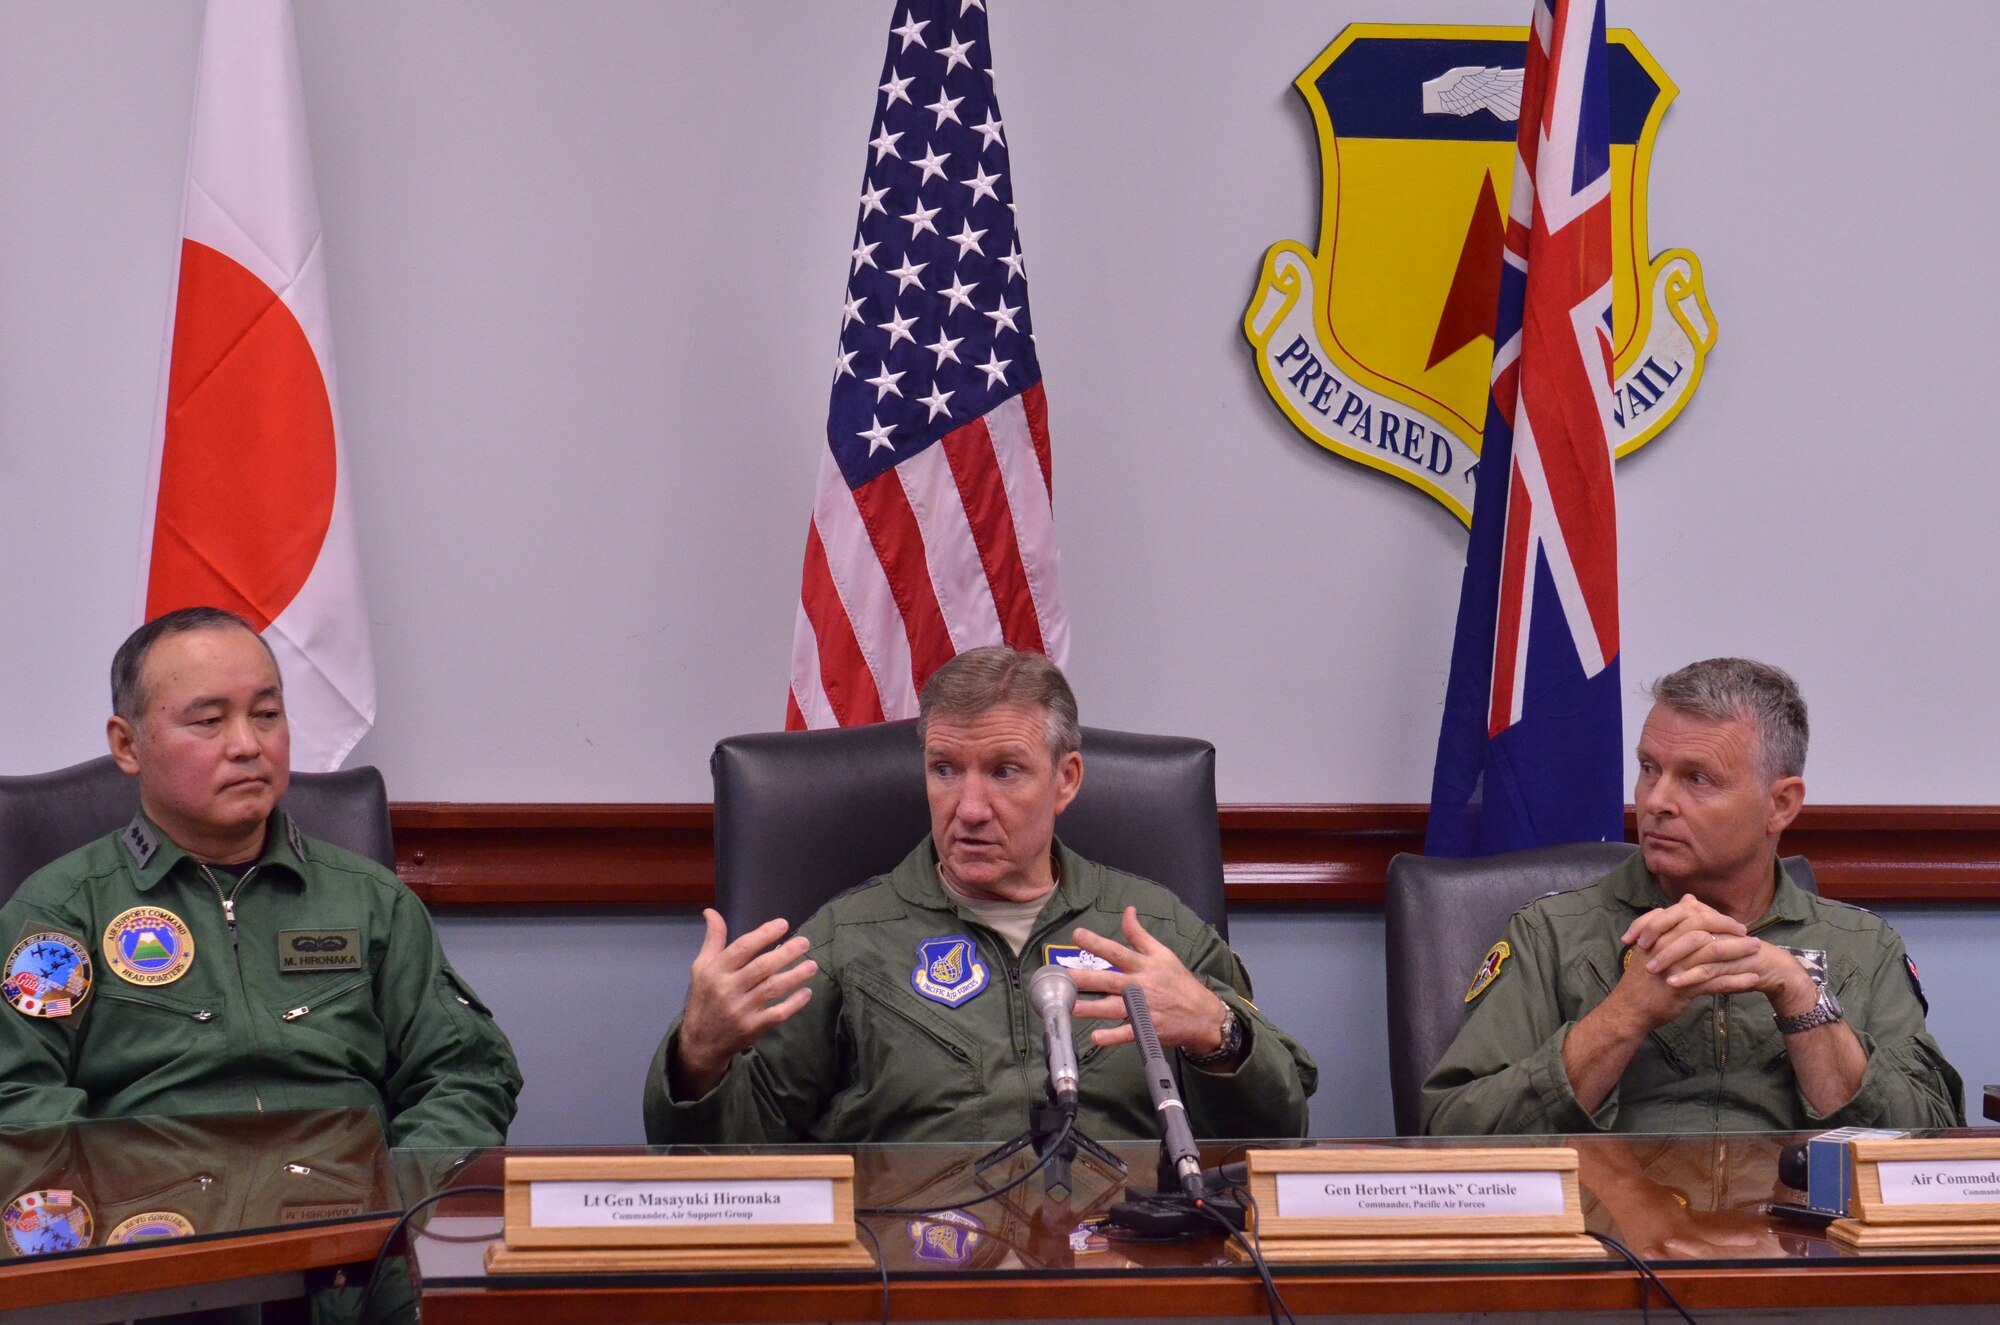 Gen. Herbert "Hawk" Carlisle, Pacific Air Forces commander, responds to a question during a media roundtable for Cope North 13 at Andersen Air Force Base, Guam Feb. 4. Carlisle was joined by Lt. Gen. Masayuki Hironaka, Japan Air Self-Defense Force Air Support Command commander, and Air Commodore Anthony Grady, Royal Australian Air Force Air Combat Group commander, in discussing the relationship between the three partner militaries and how Cope North serves to prepare them for real-world response events.  Cope North is a multilateral aerial exercise, held once or twice yearly, designed to increase the combat readiness and interoperability of the U.S.
Air Force, Japan Air Self-Defense Force, Royal Australian Air Force and other Pacific partner nations.
 (U.S. Air Force photo by Staff Sgt. Alexandre Montes/RELEASED)